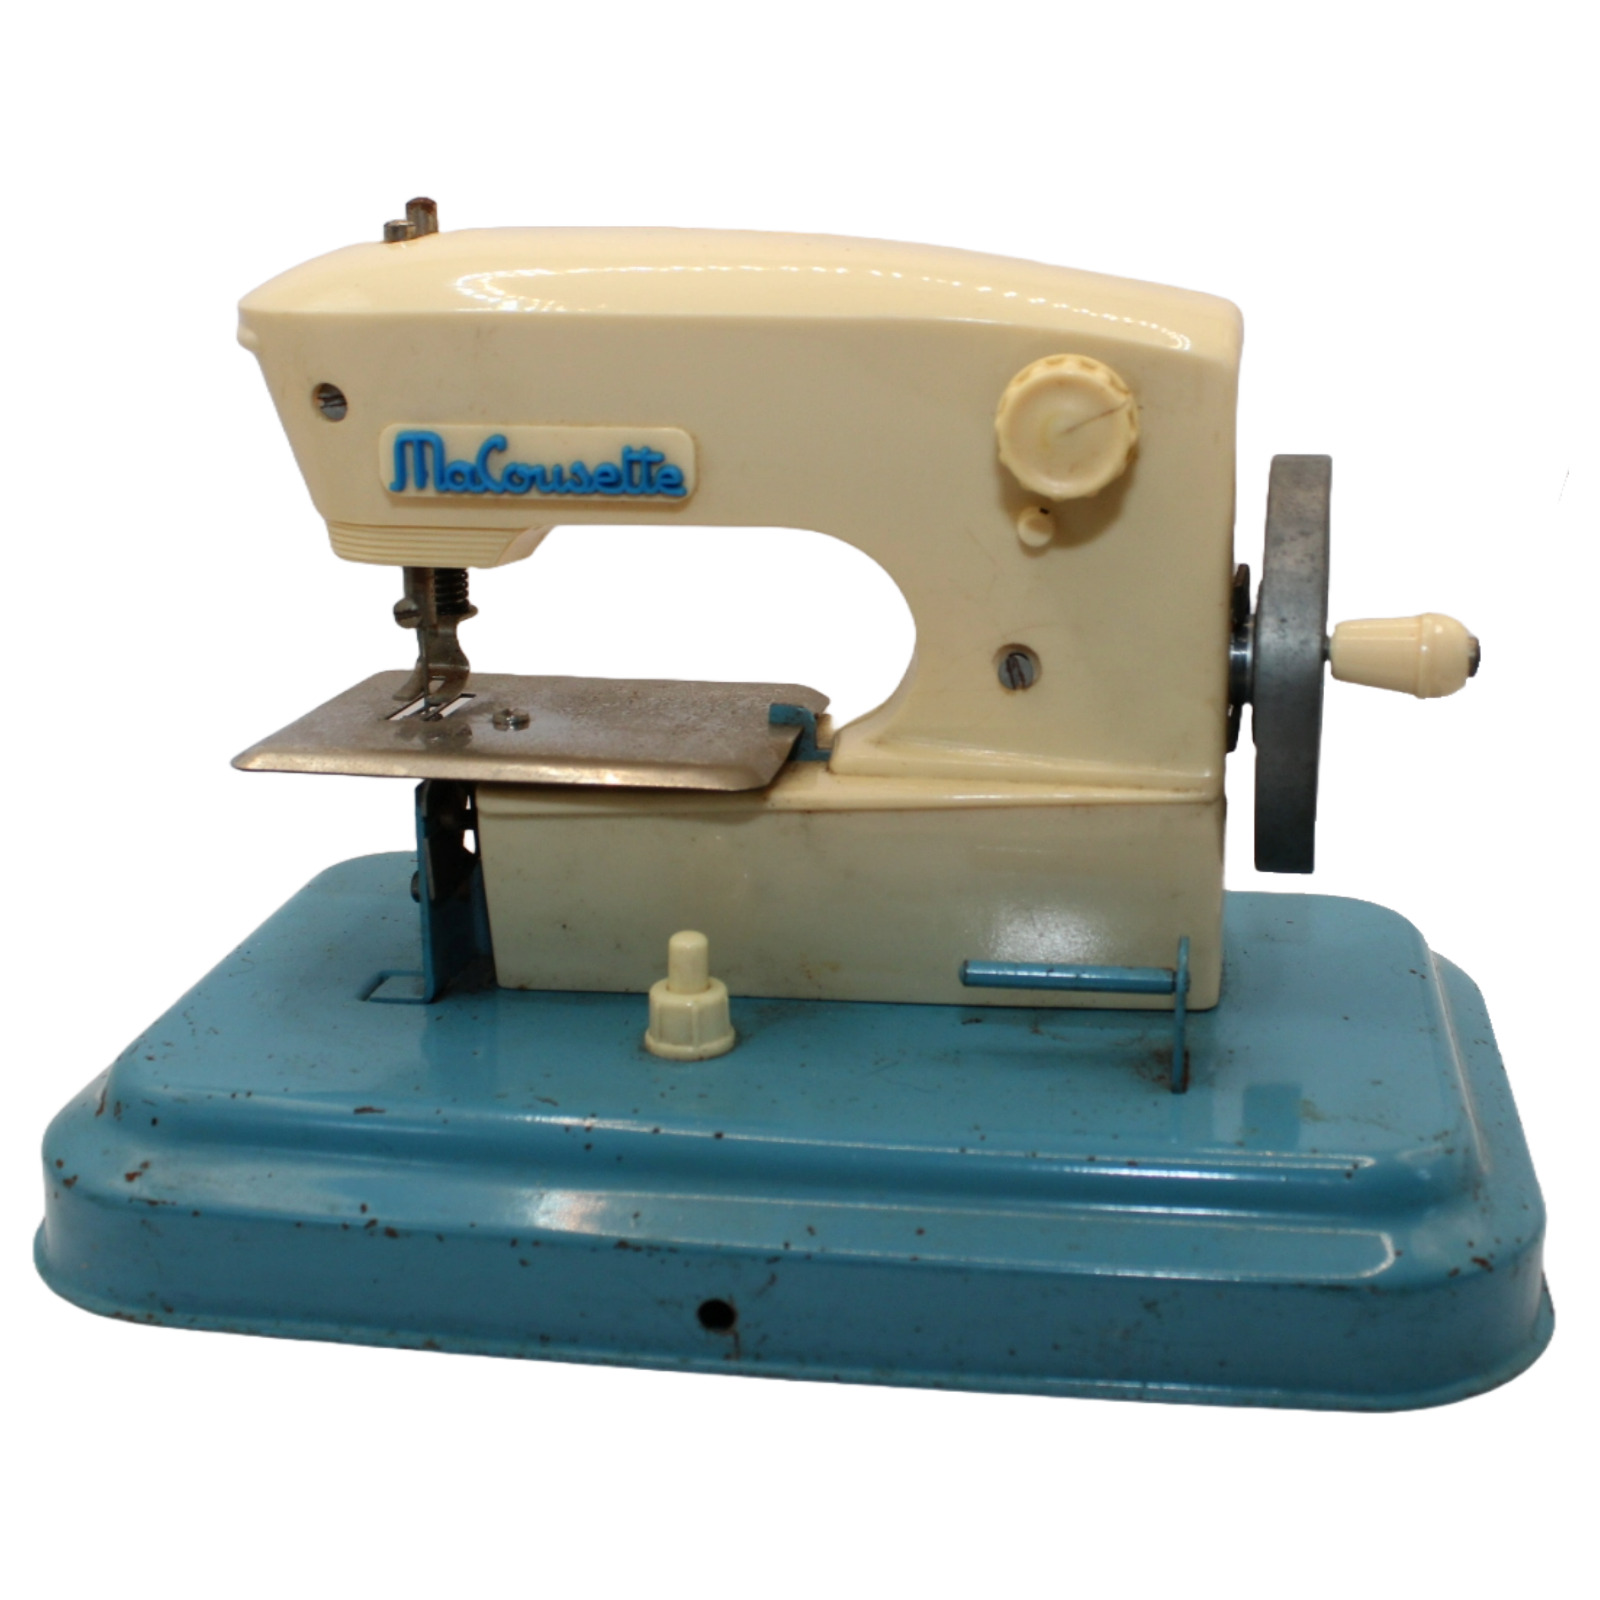 Rare Vintage MaCousette Child\'s Sewing Machine from 1940/50 - Original Box - Mad